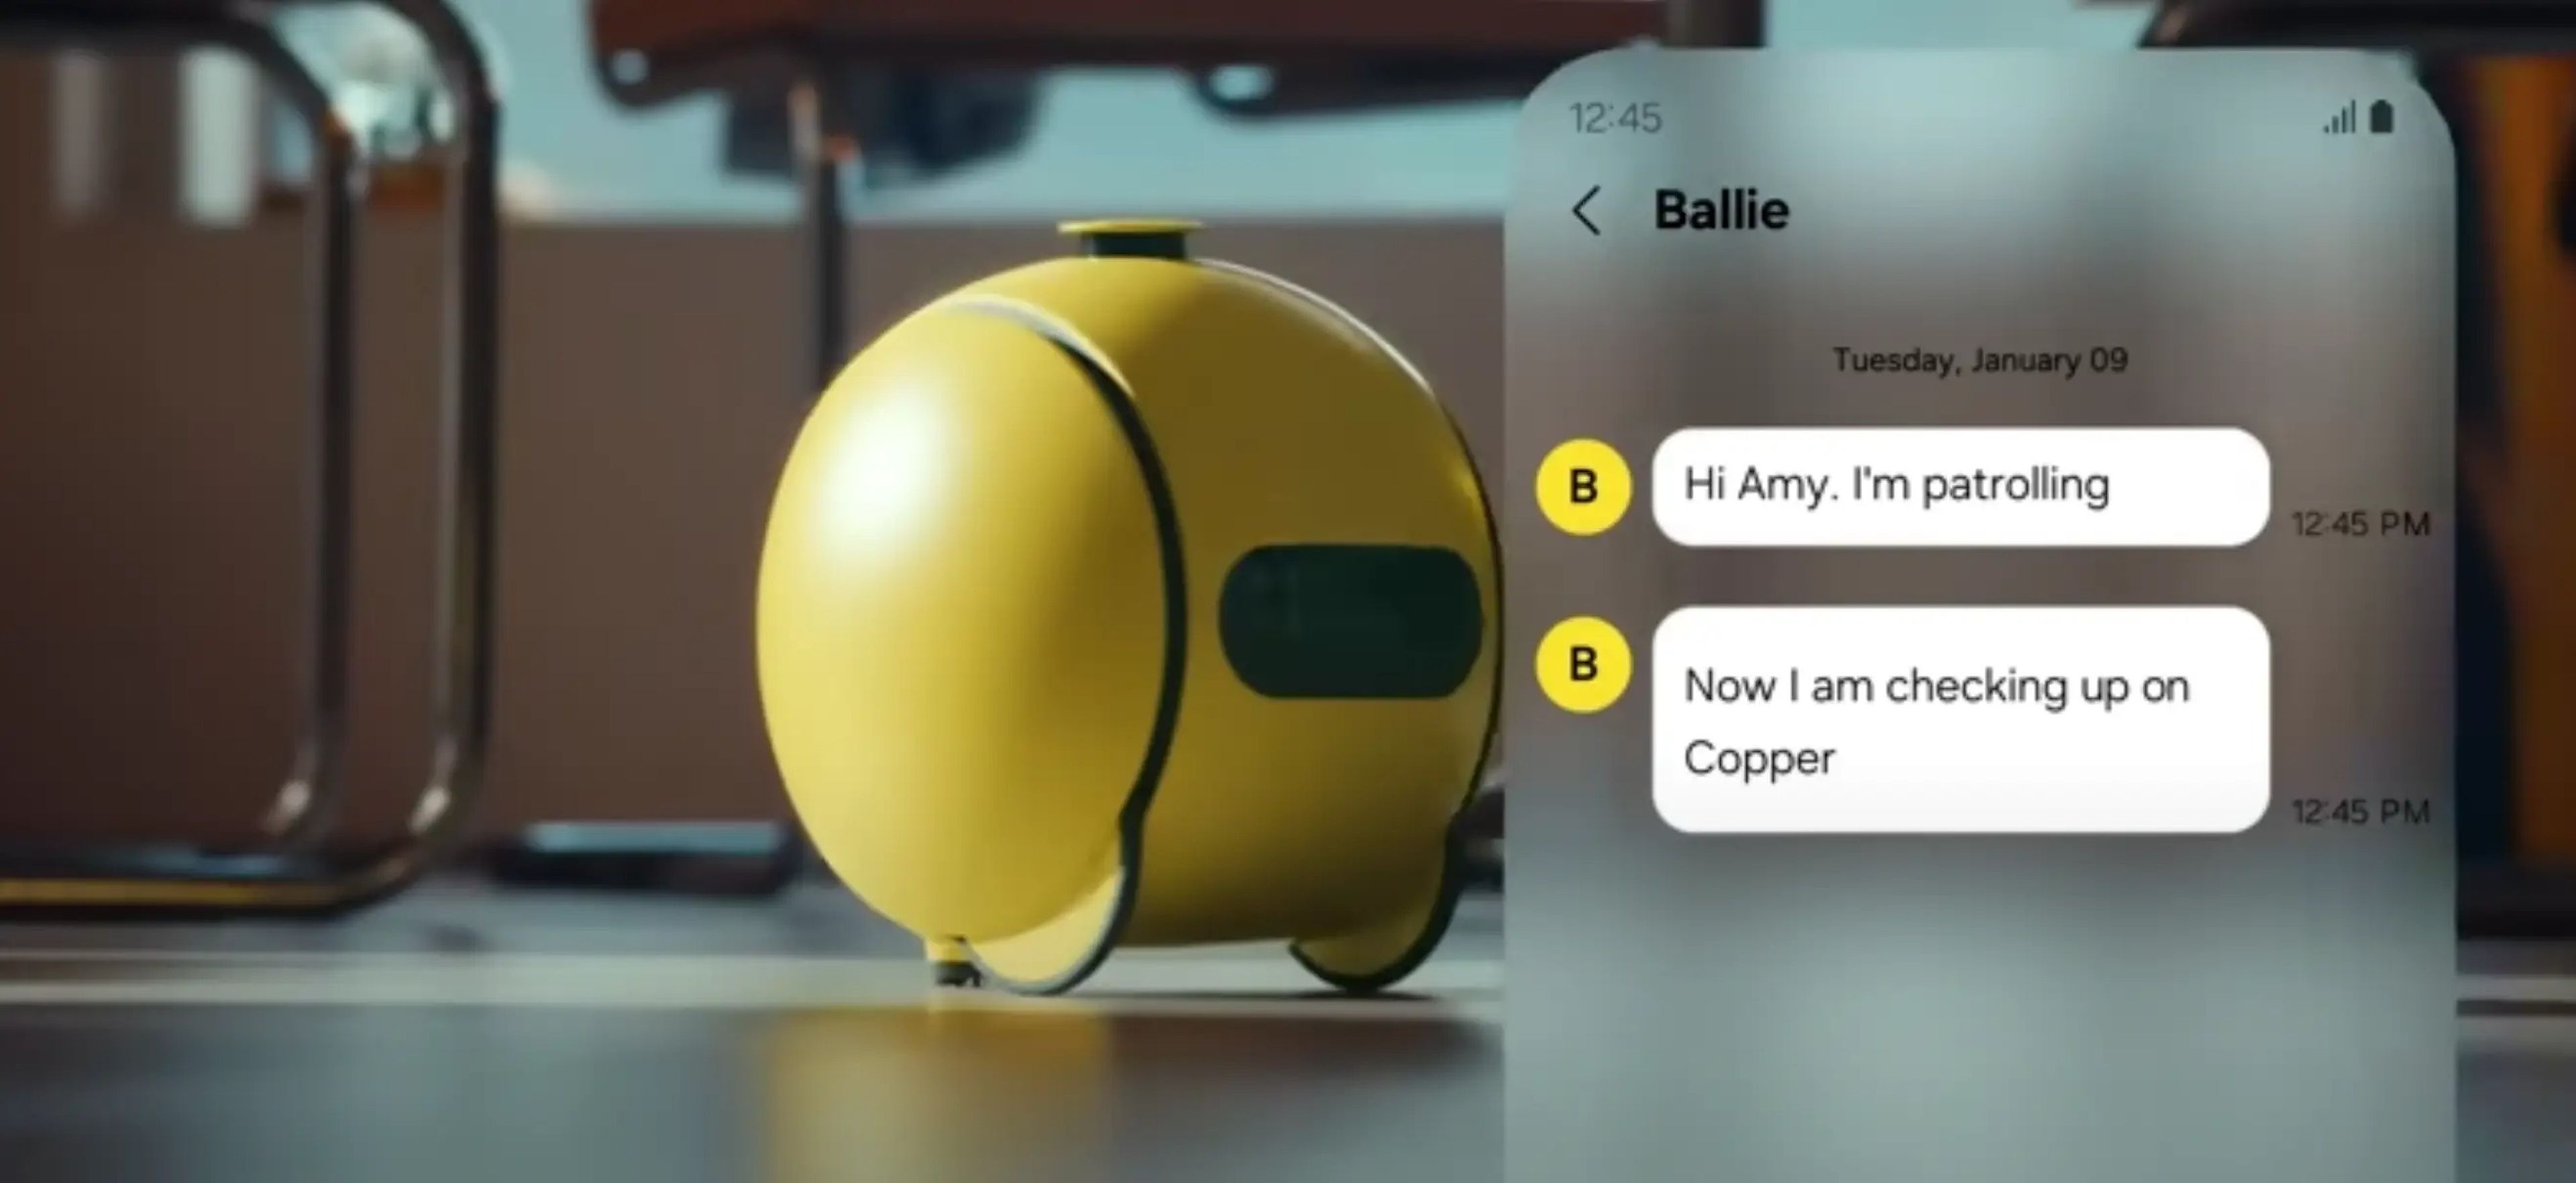 Samsung hopes to launch its home robot, Bali, this year.